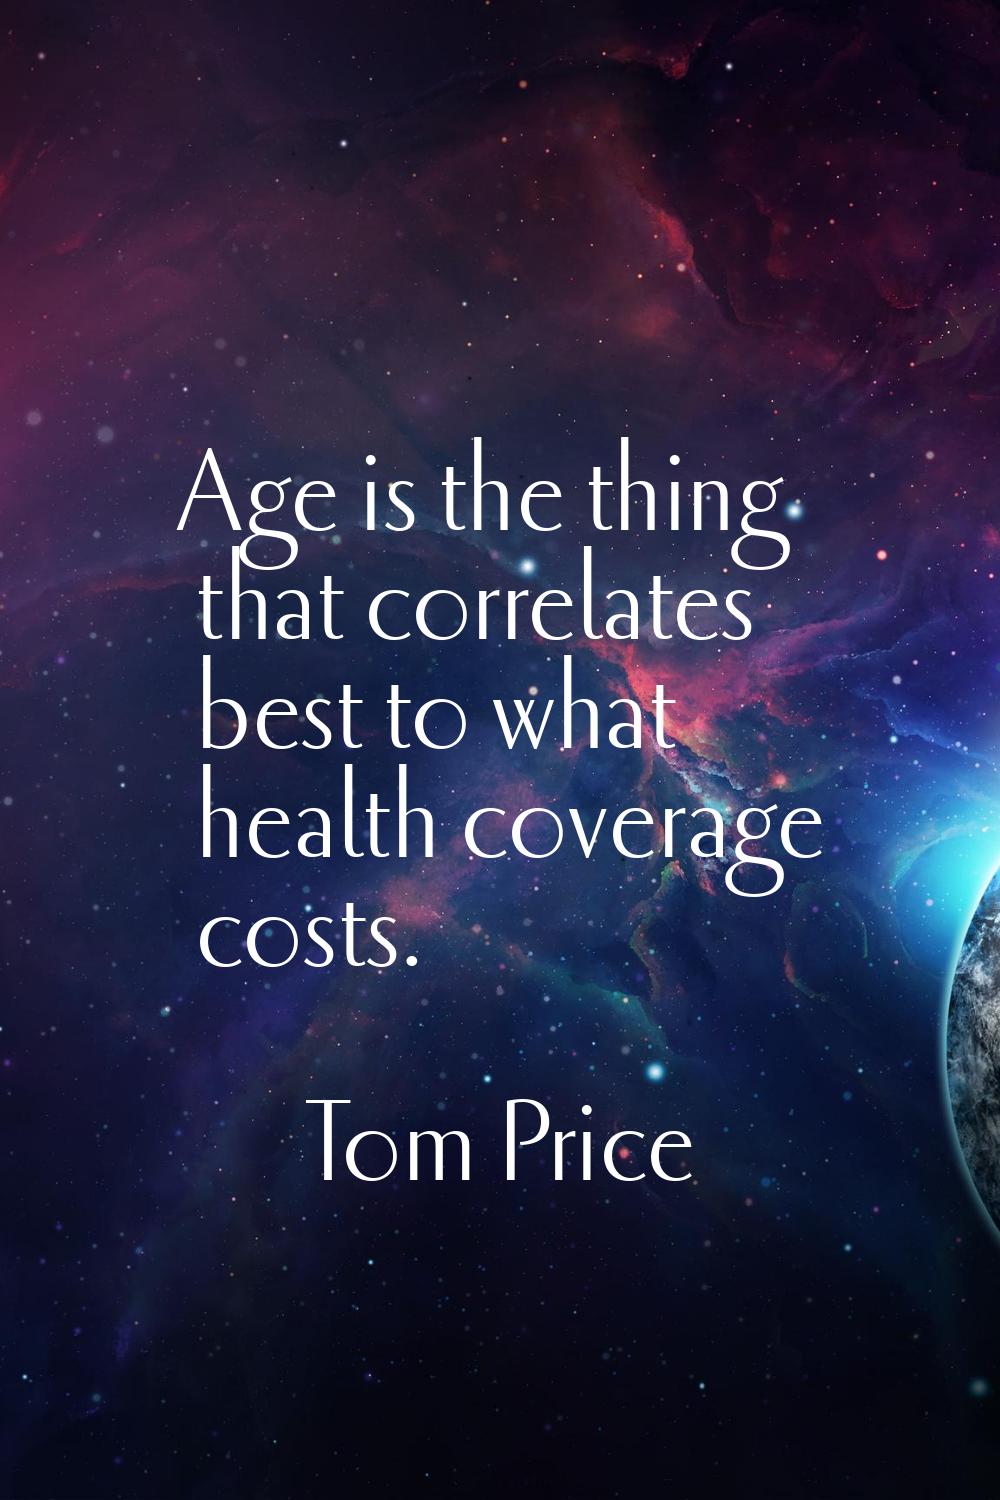 Age is the thing that correlates best to what health coverage costs.